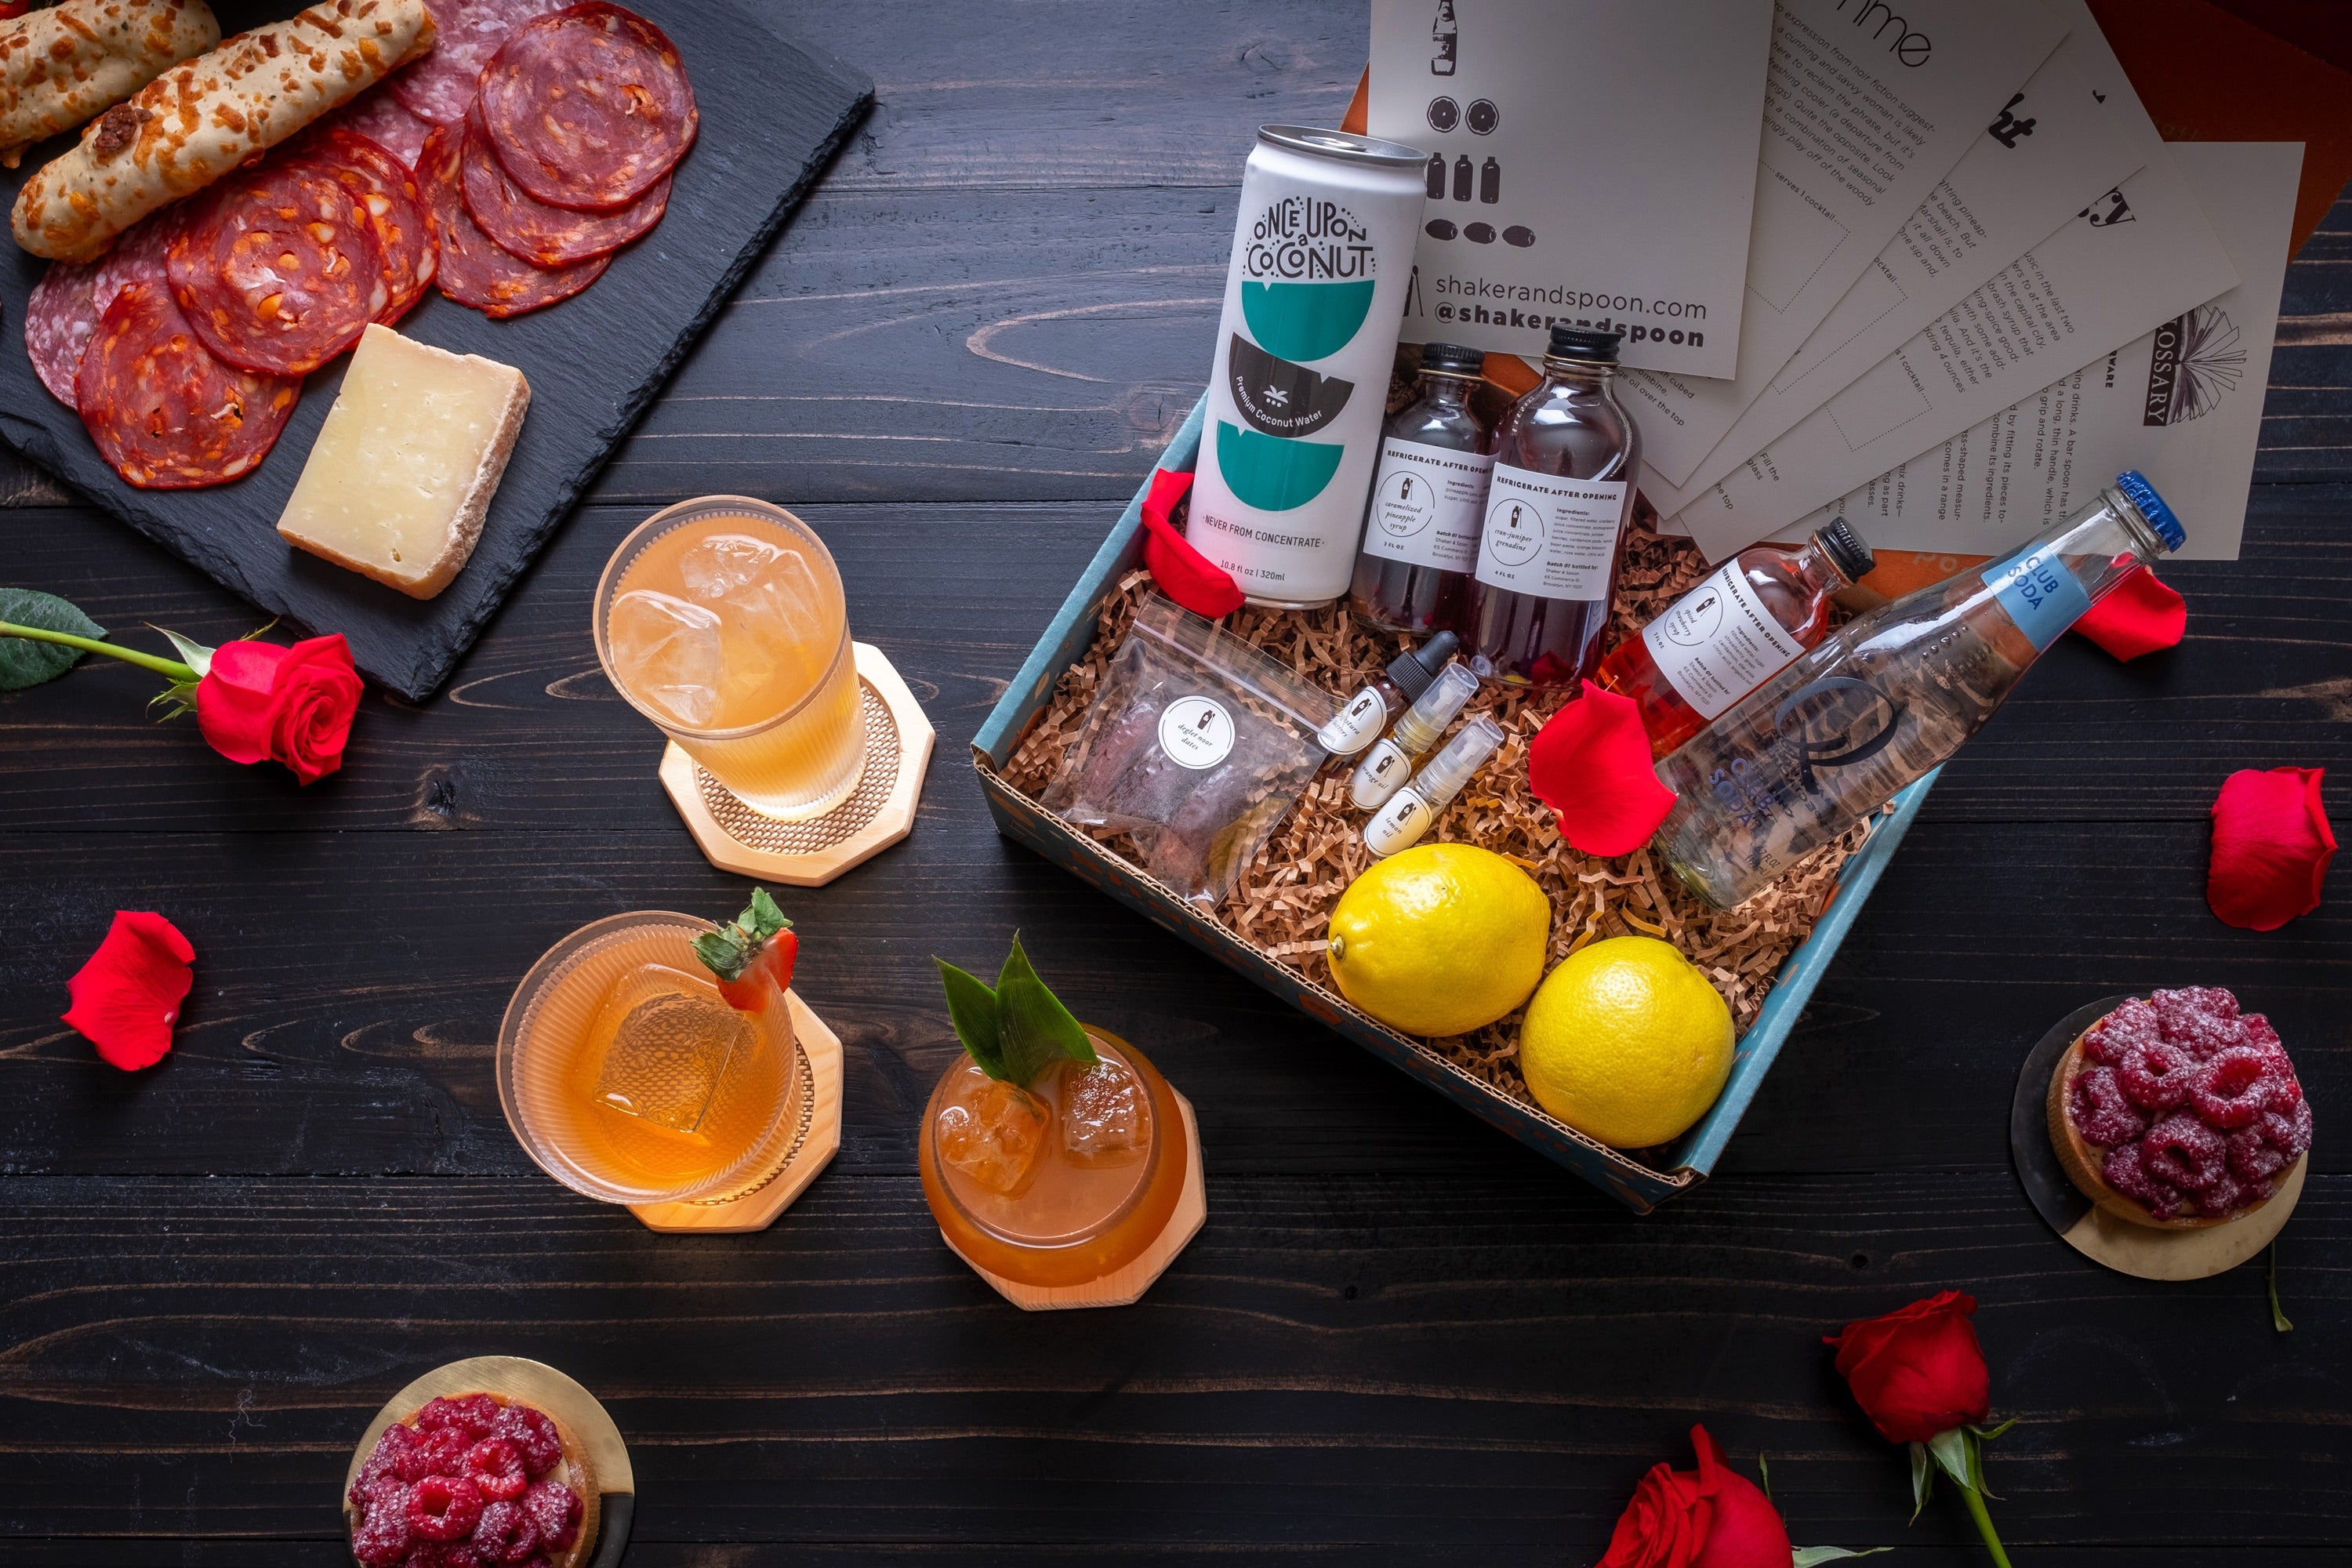 Father's Day Cocktail Kits - TASTE cocktails